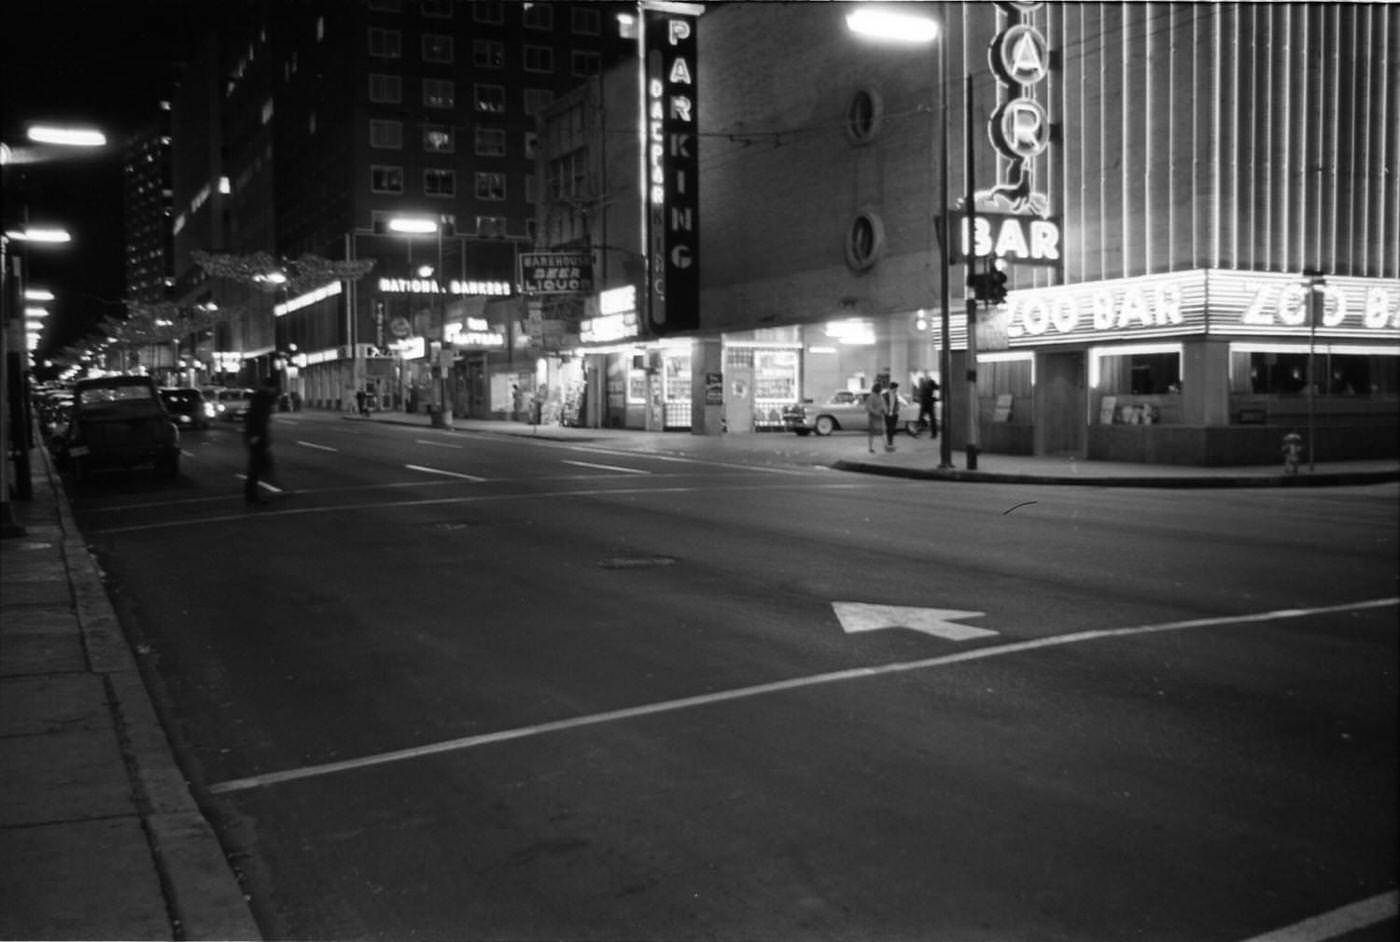 Commerce Street in downtown Dallas the evening of November 22, 1963